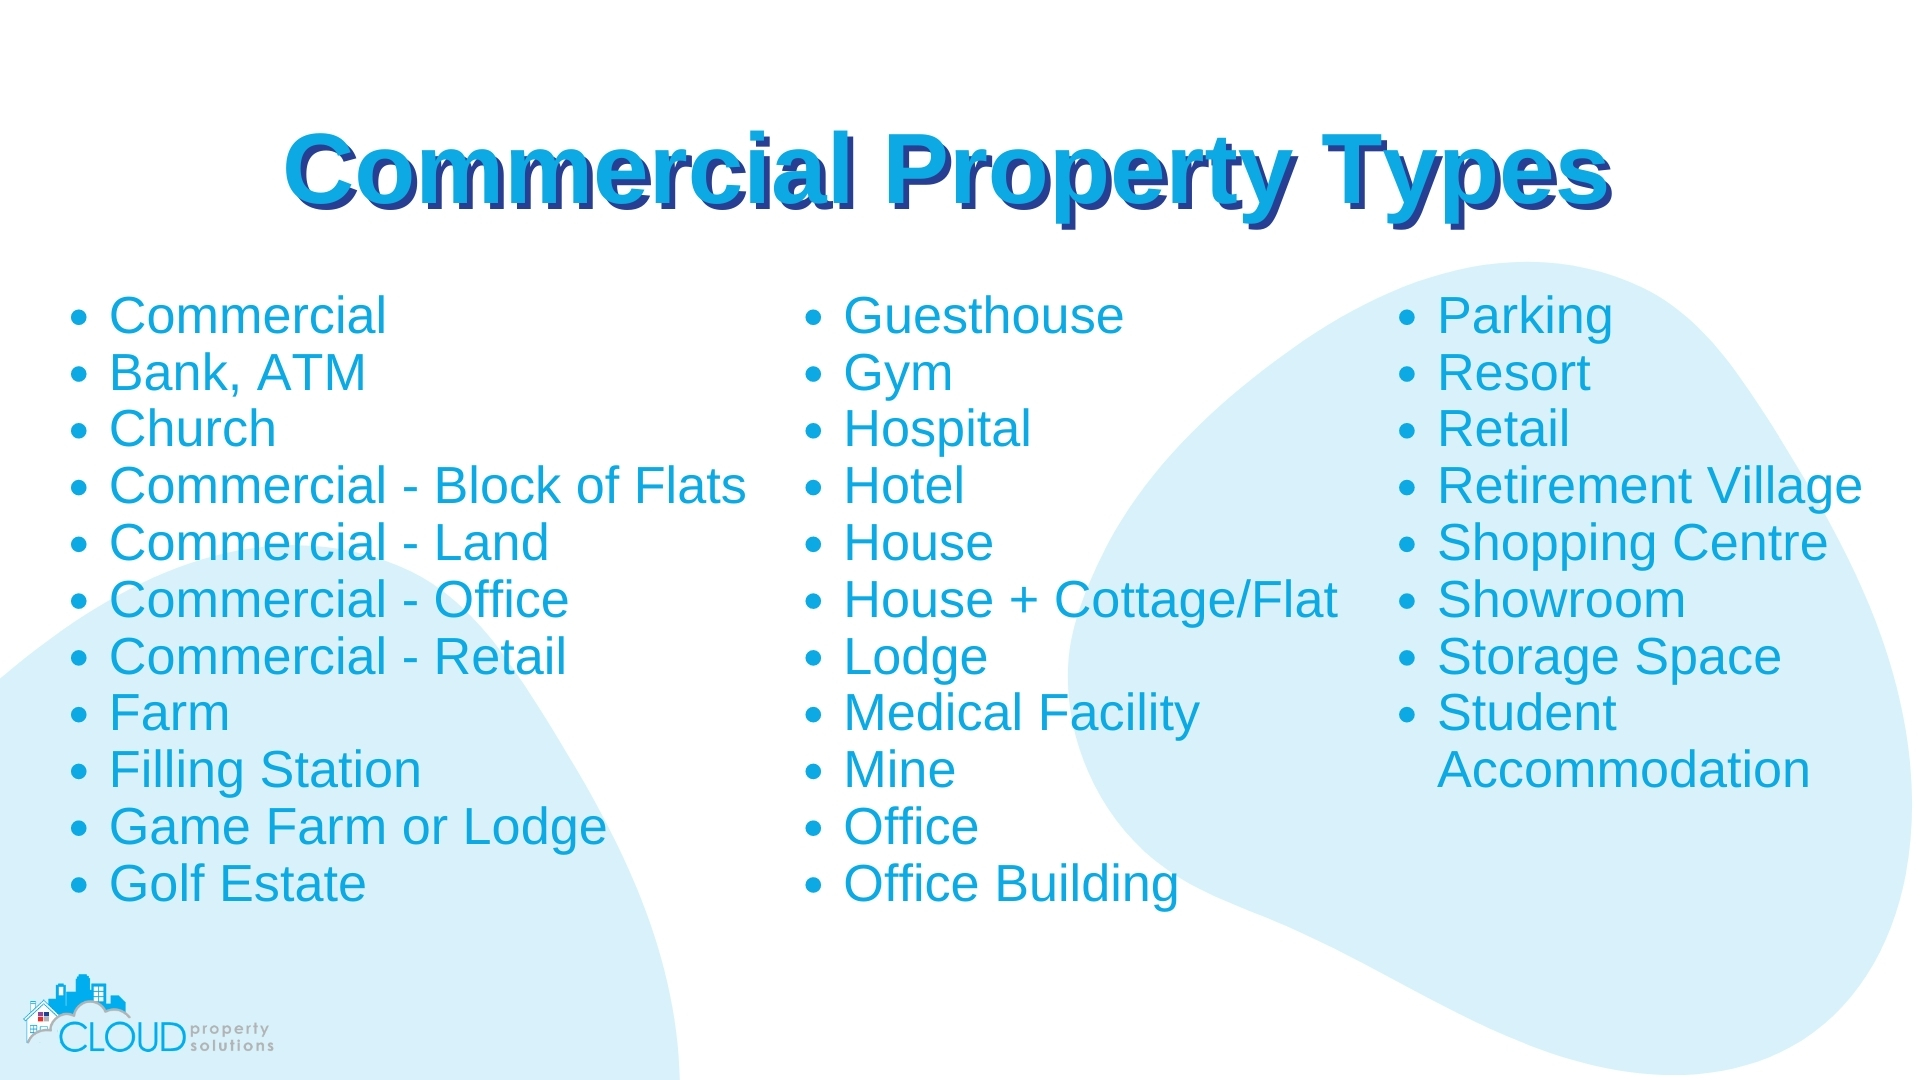 Commercial Property Types